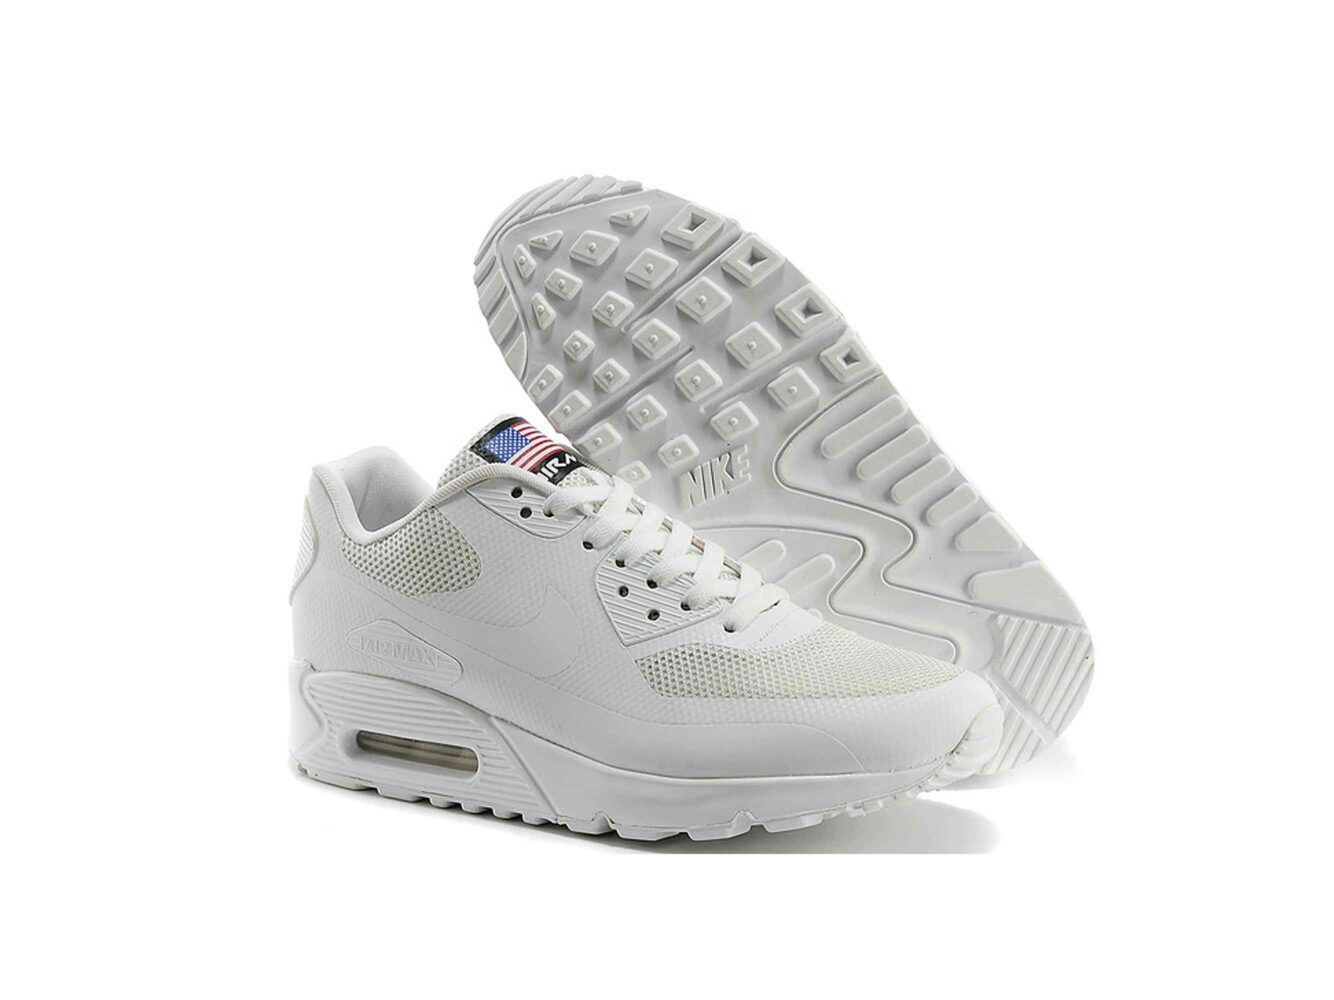 Nike Air Max 90 Hyperfuse Independence Day 2013 White Купить